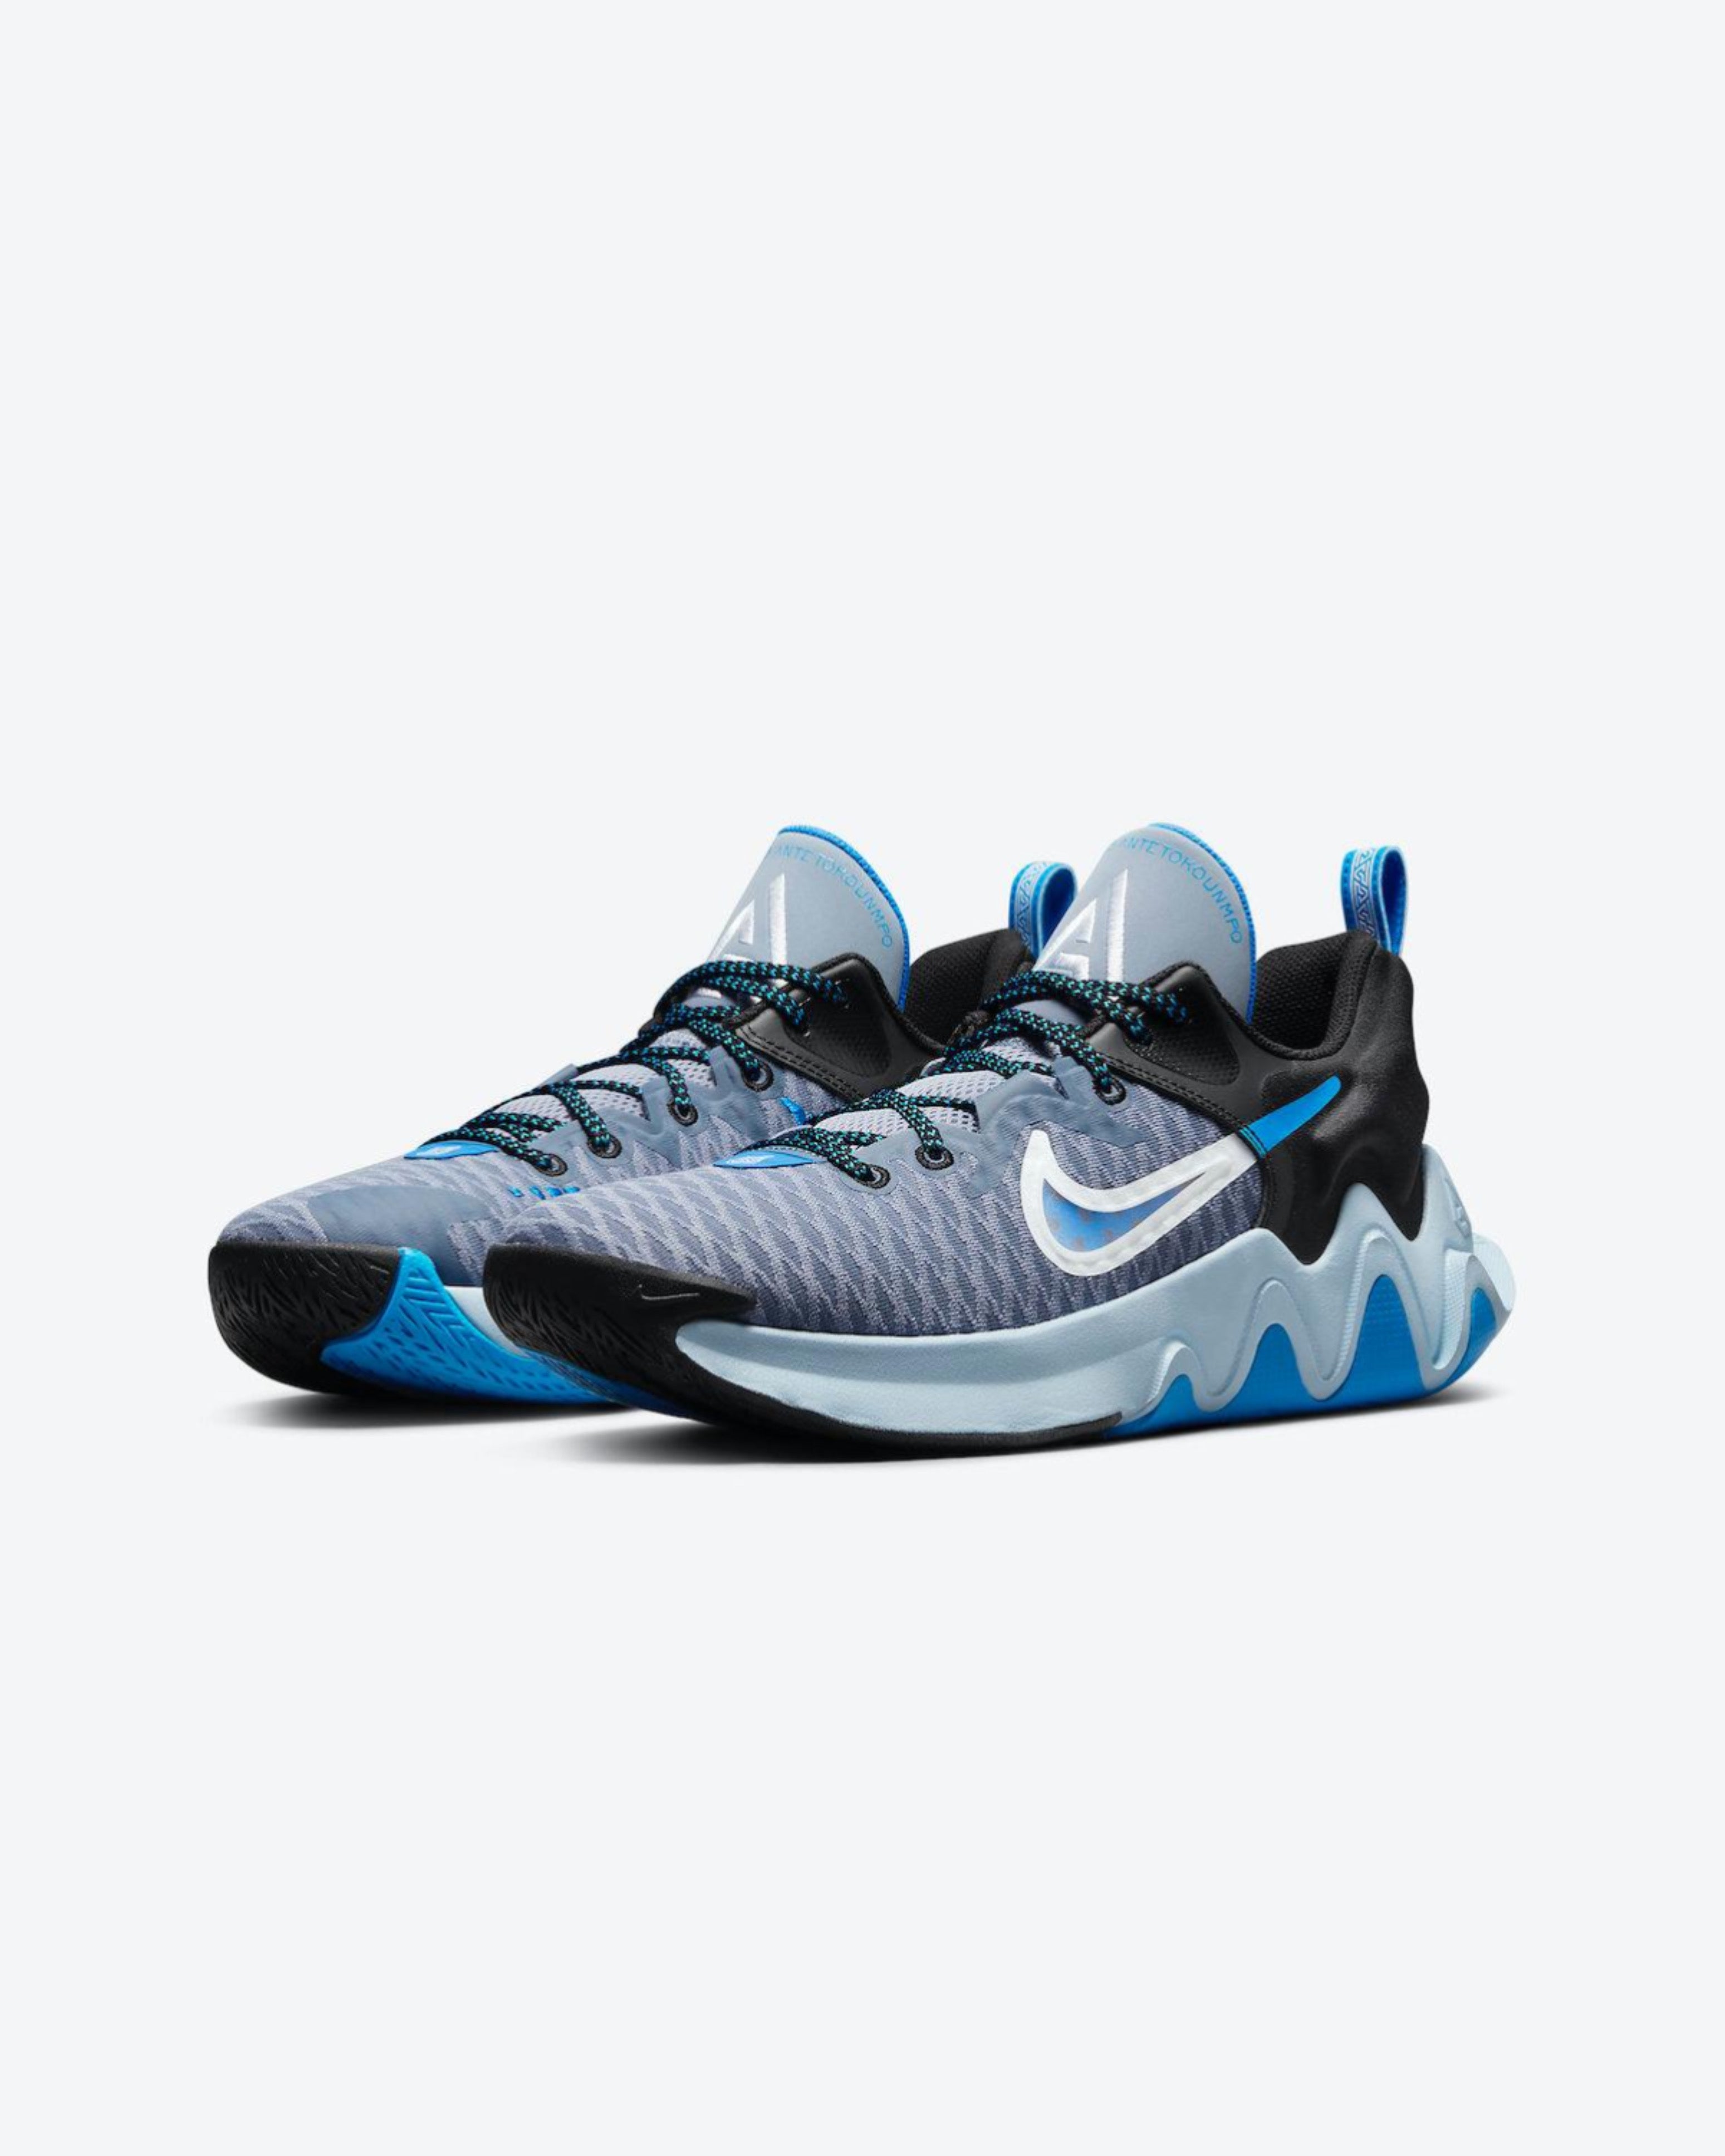 Nike Giannis immortality 2 blue and grey